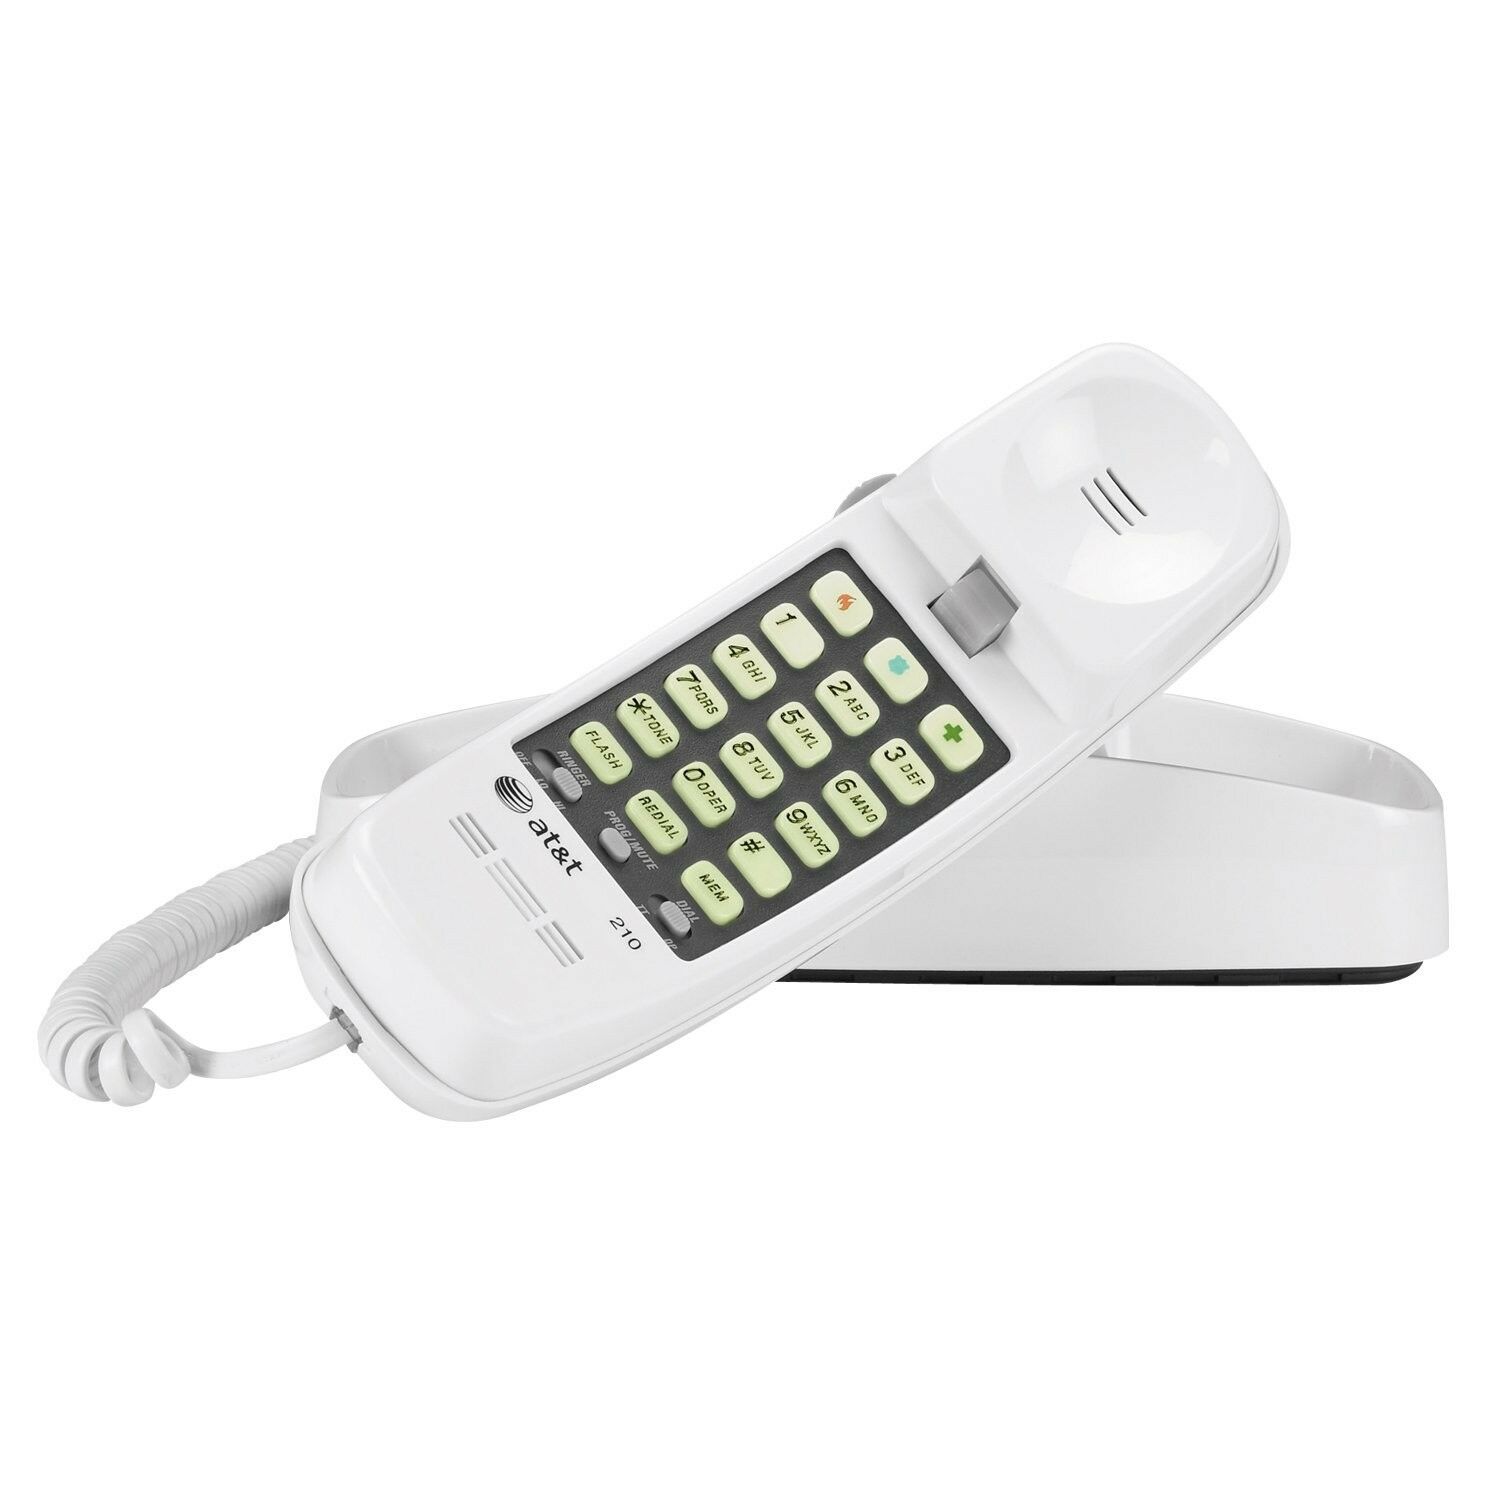 AT&T 210M Corded Phone Desk Wall Mount Trimline Telephone Handset White New - image 1 of 3